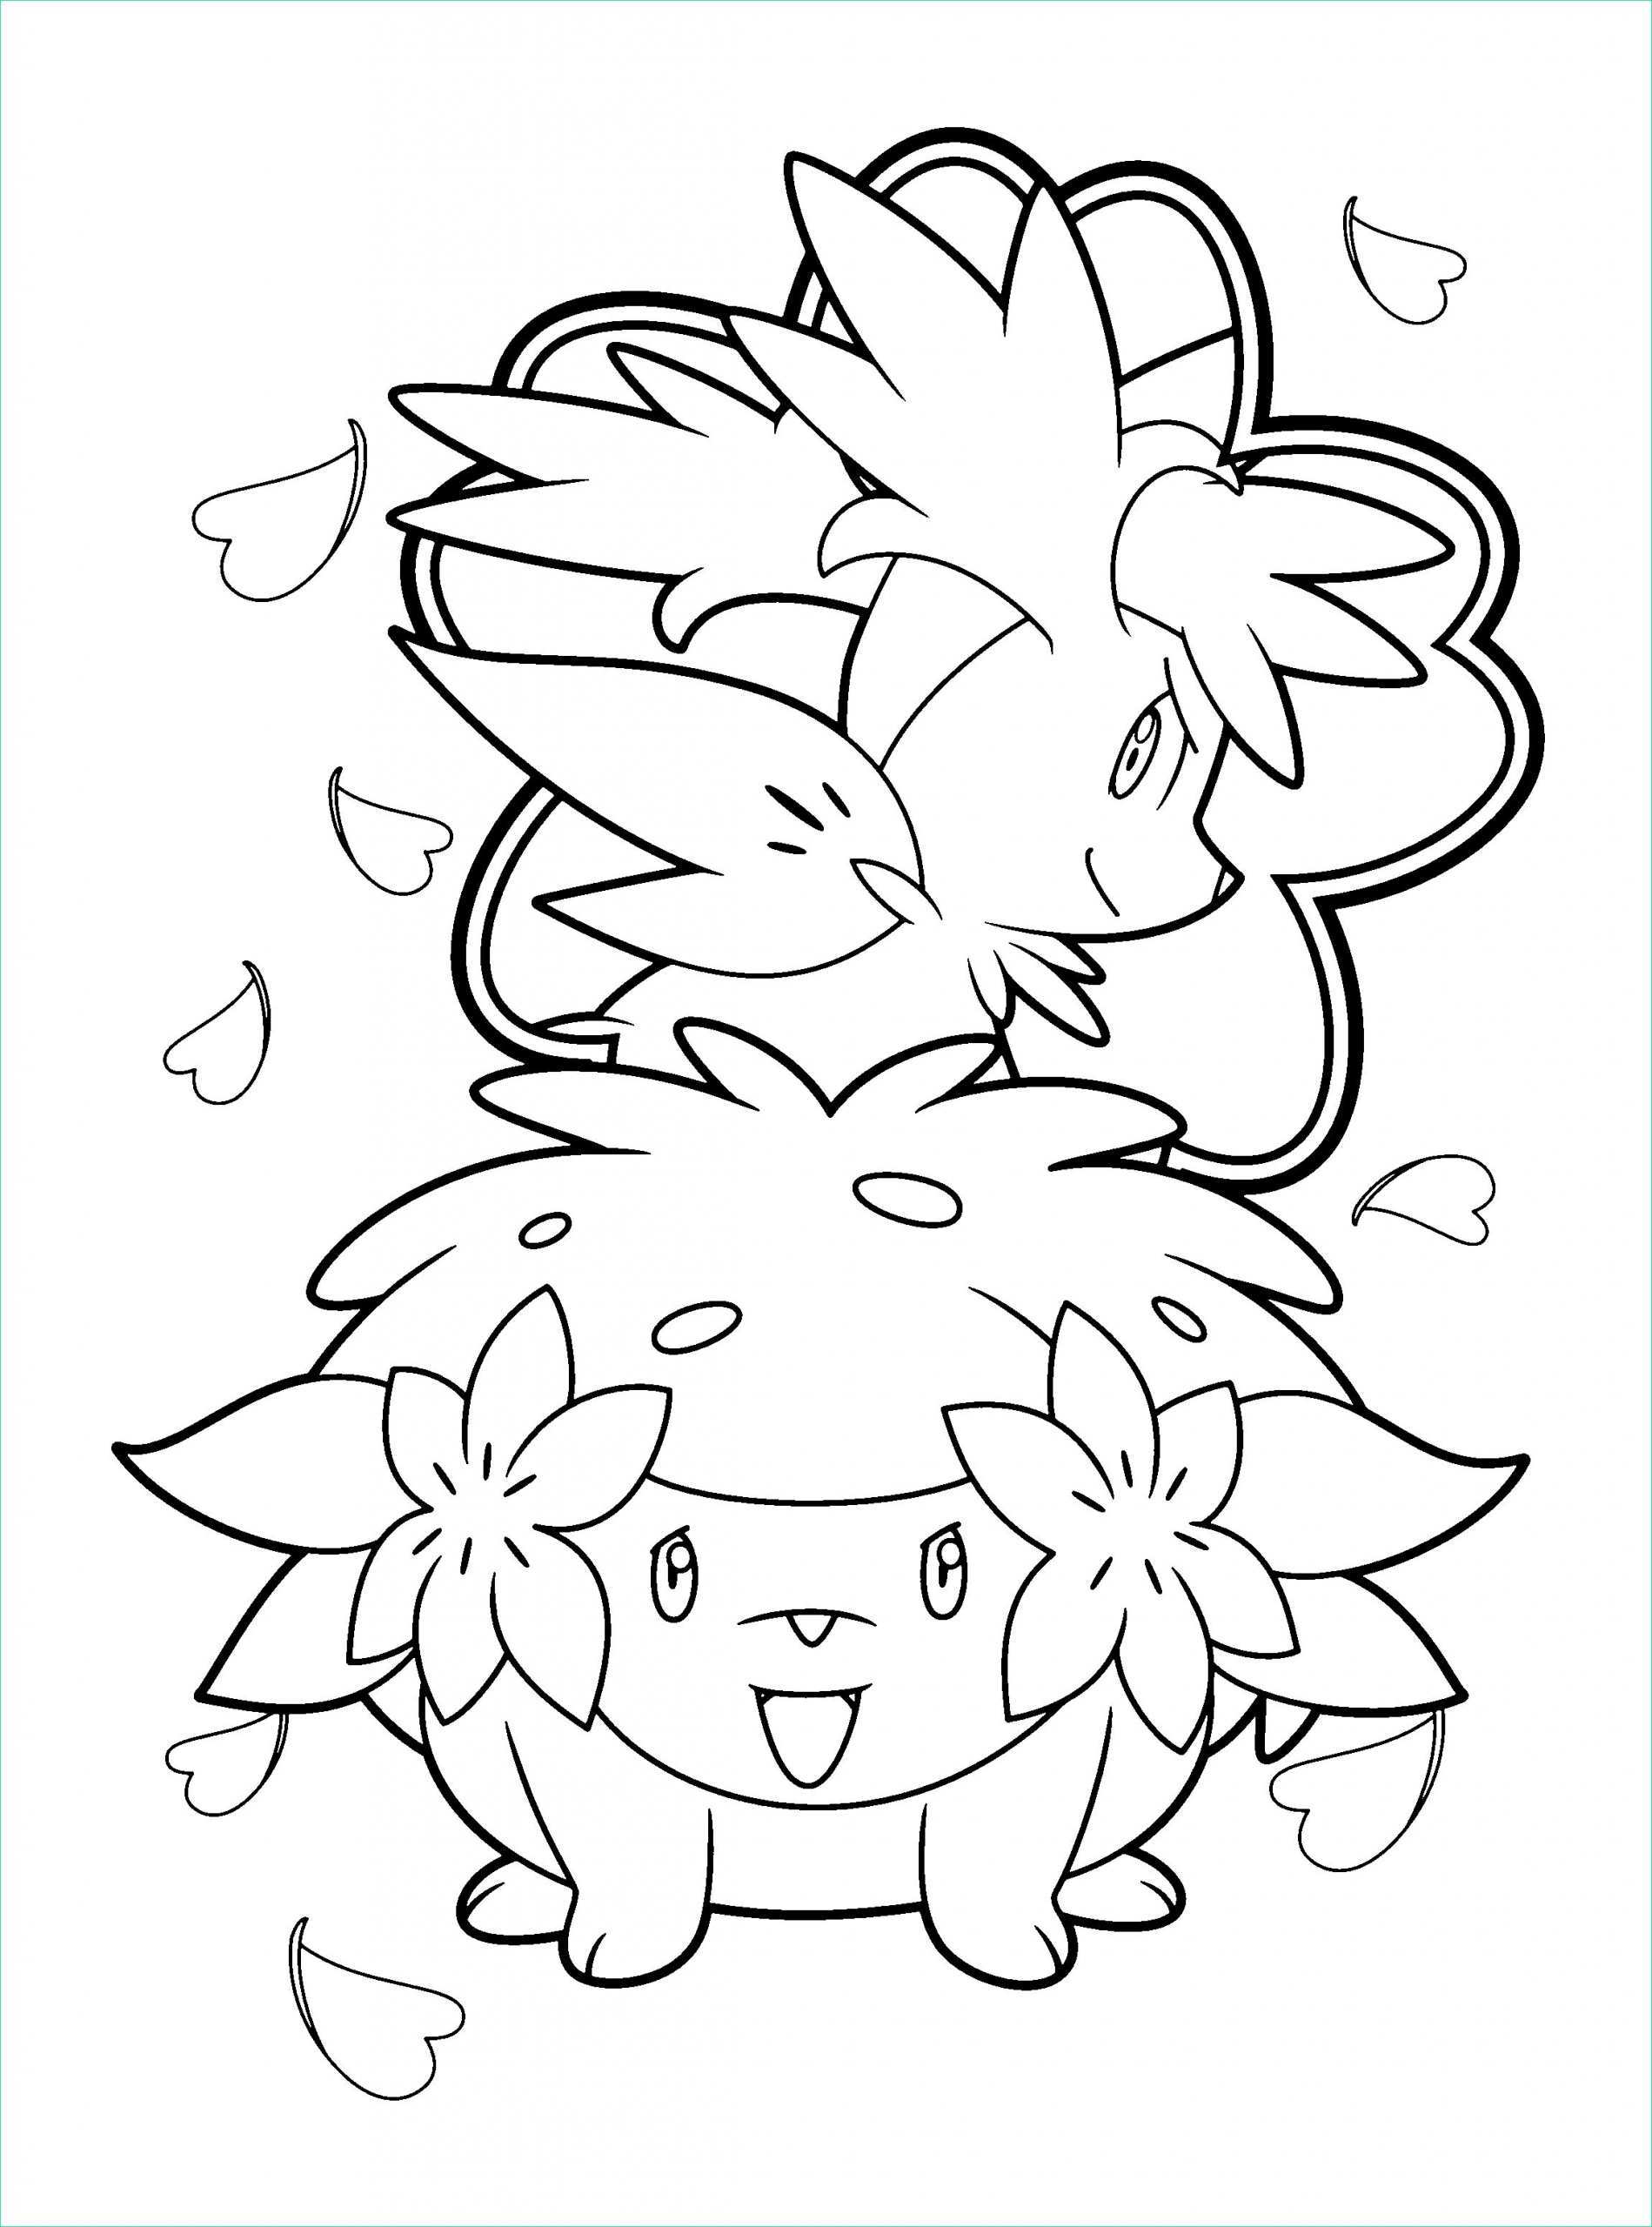 Coloriagepokemon Impressionnant Image Coloring Page Pokemon Diamond Pearl Coloring Pages 84